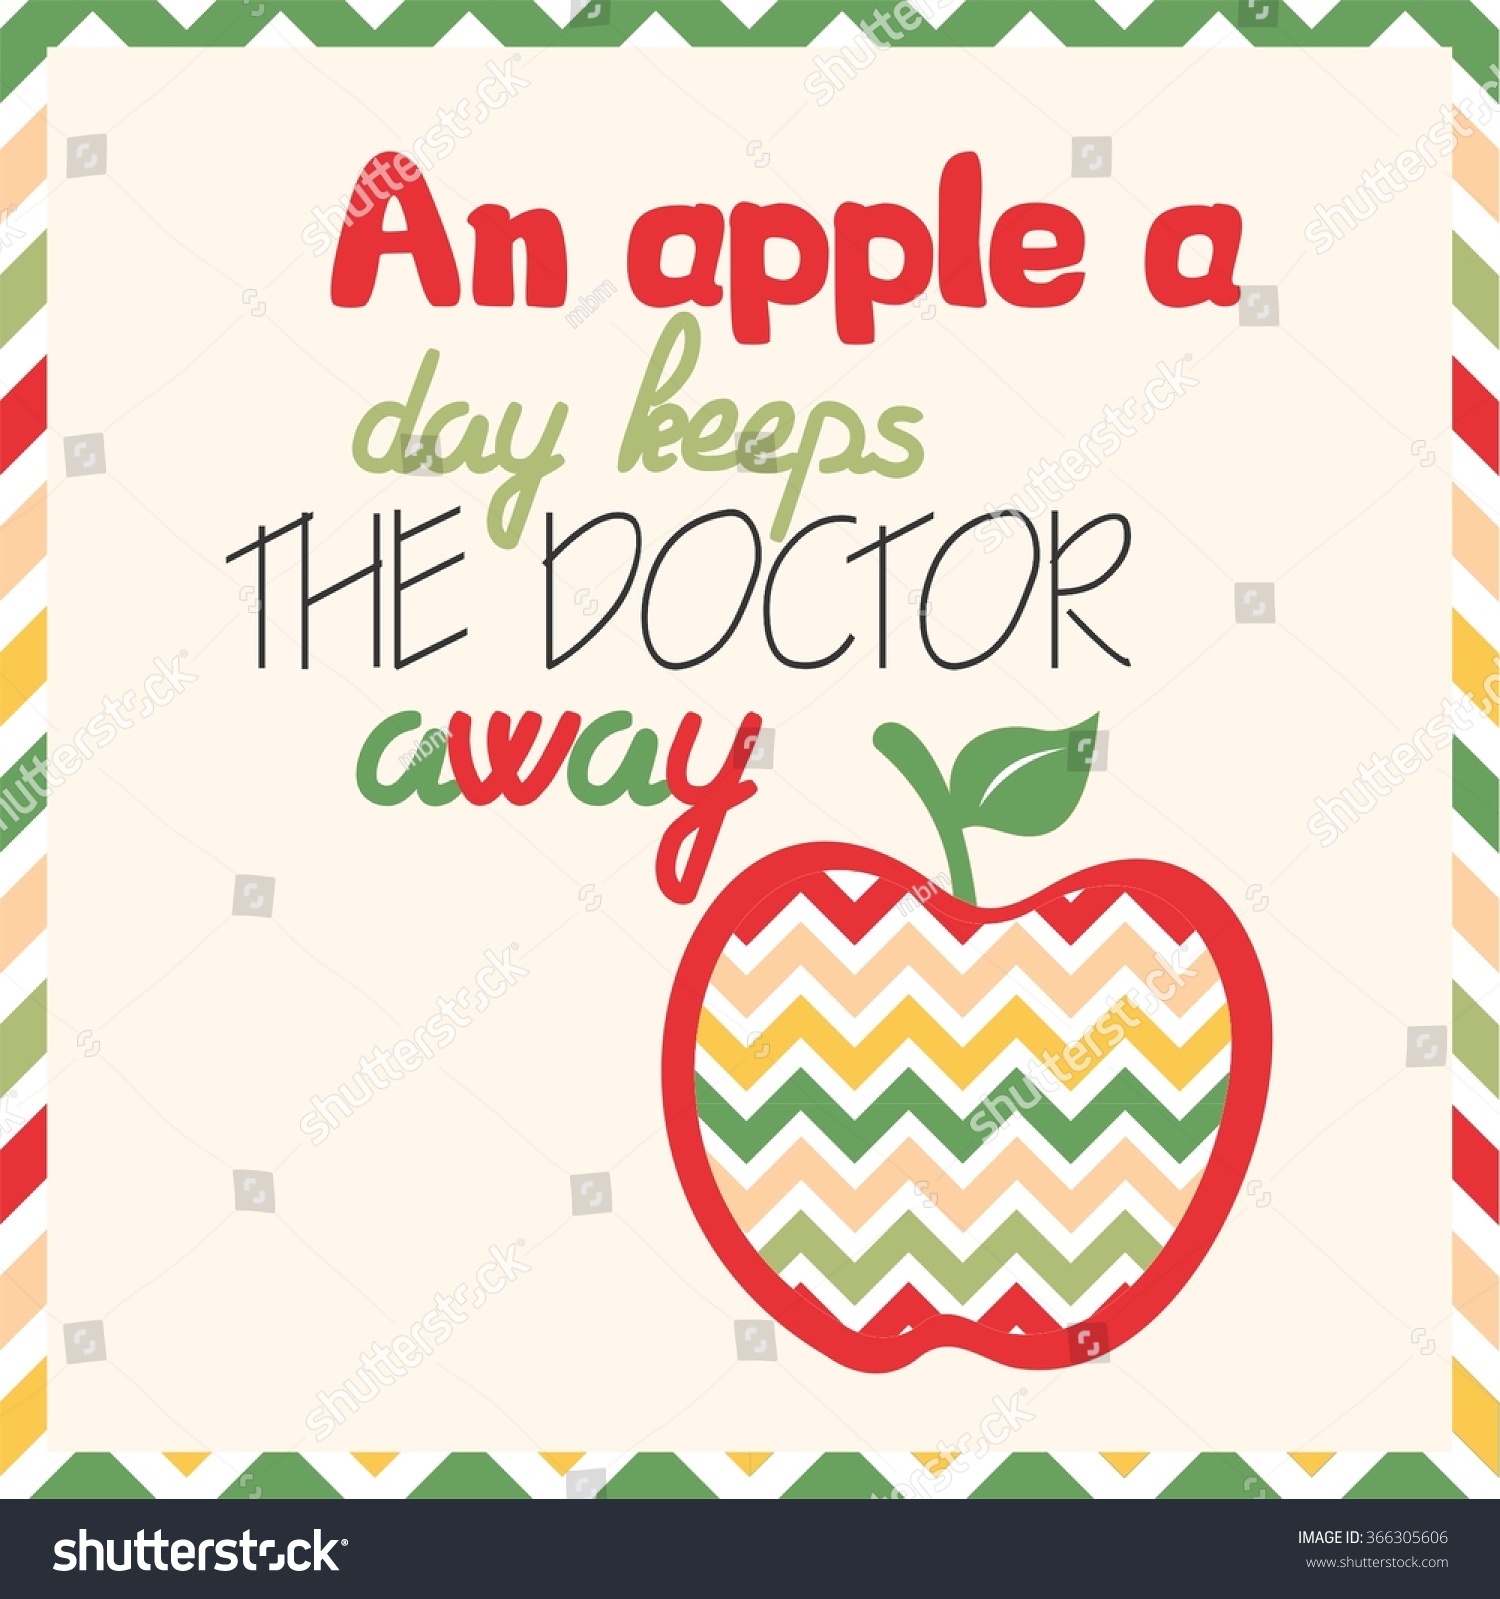 Vector Illustration Apple Motivational Quotes Apple Stock Vector Royalty Free